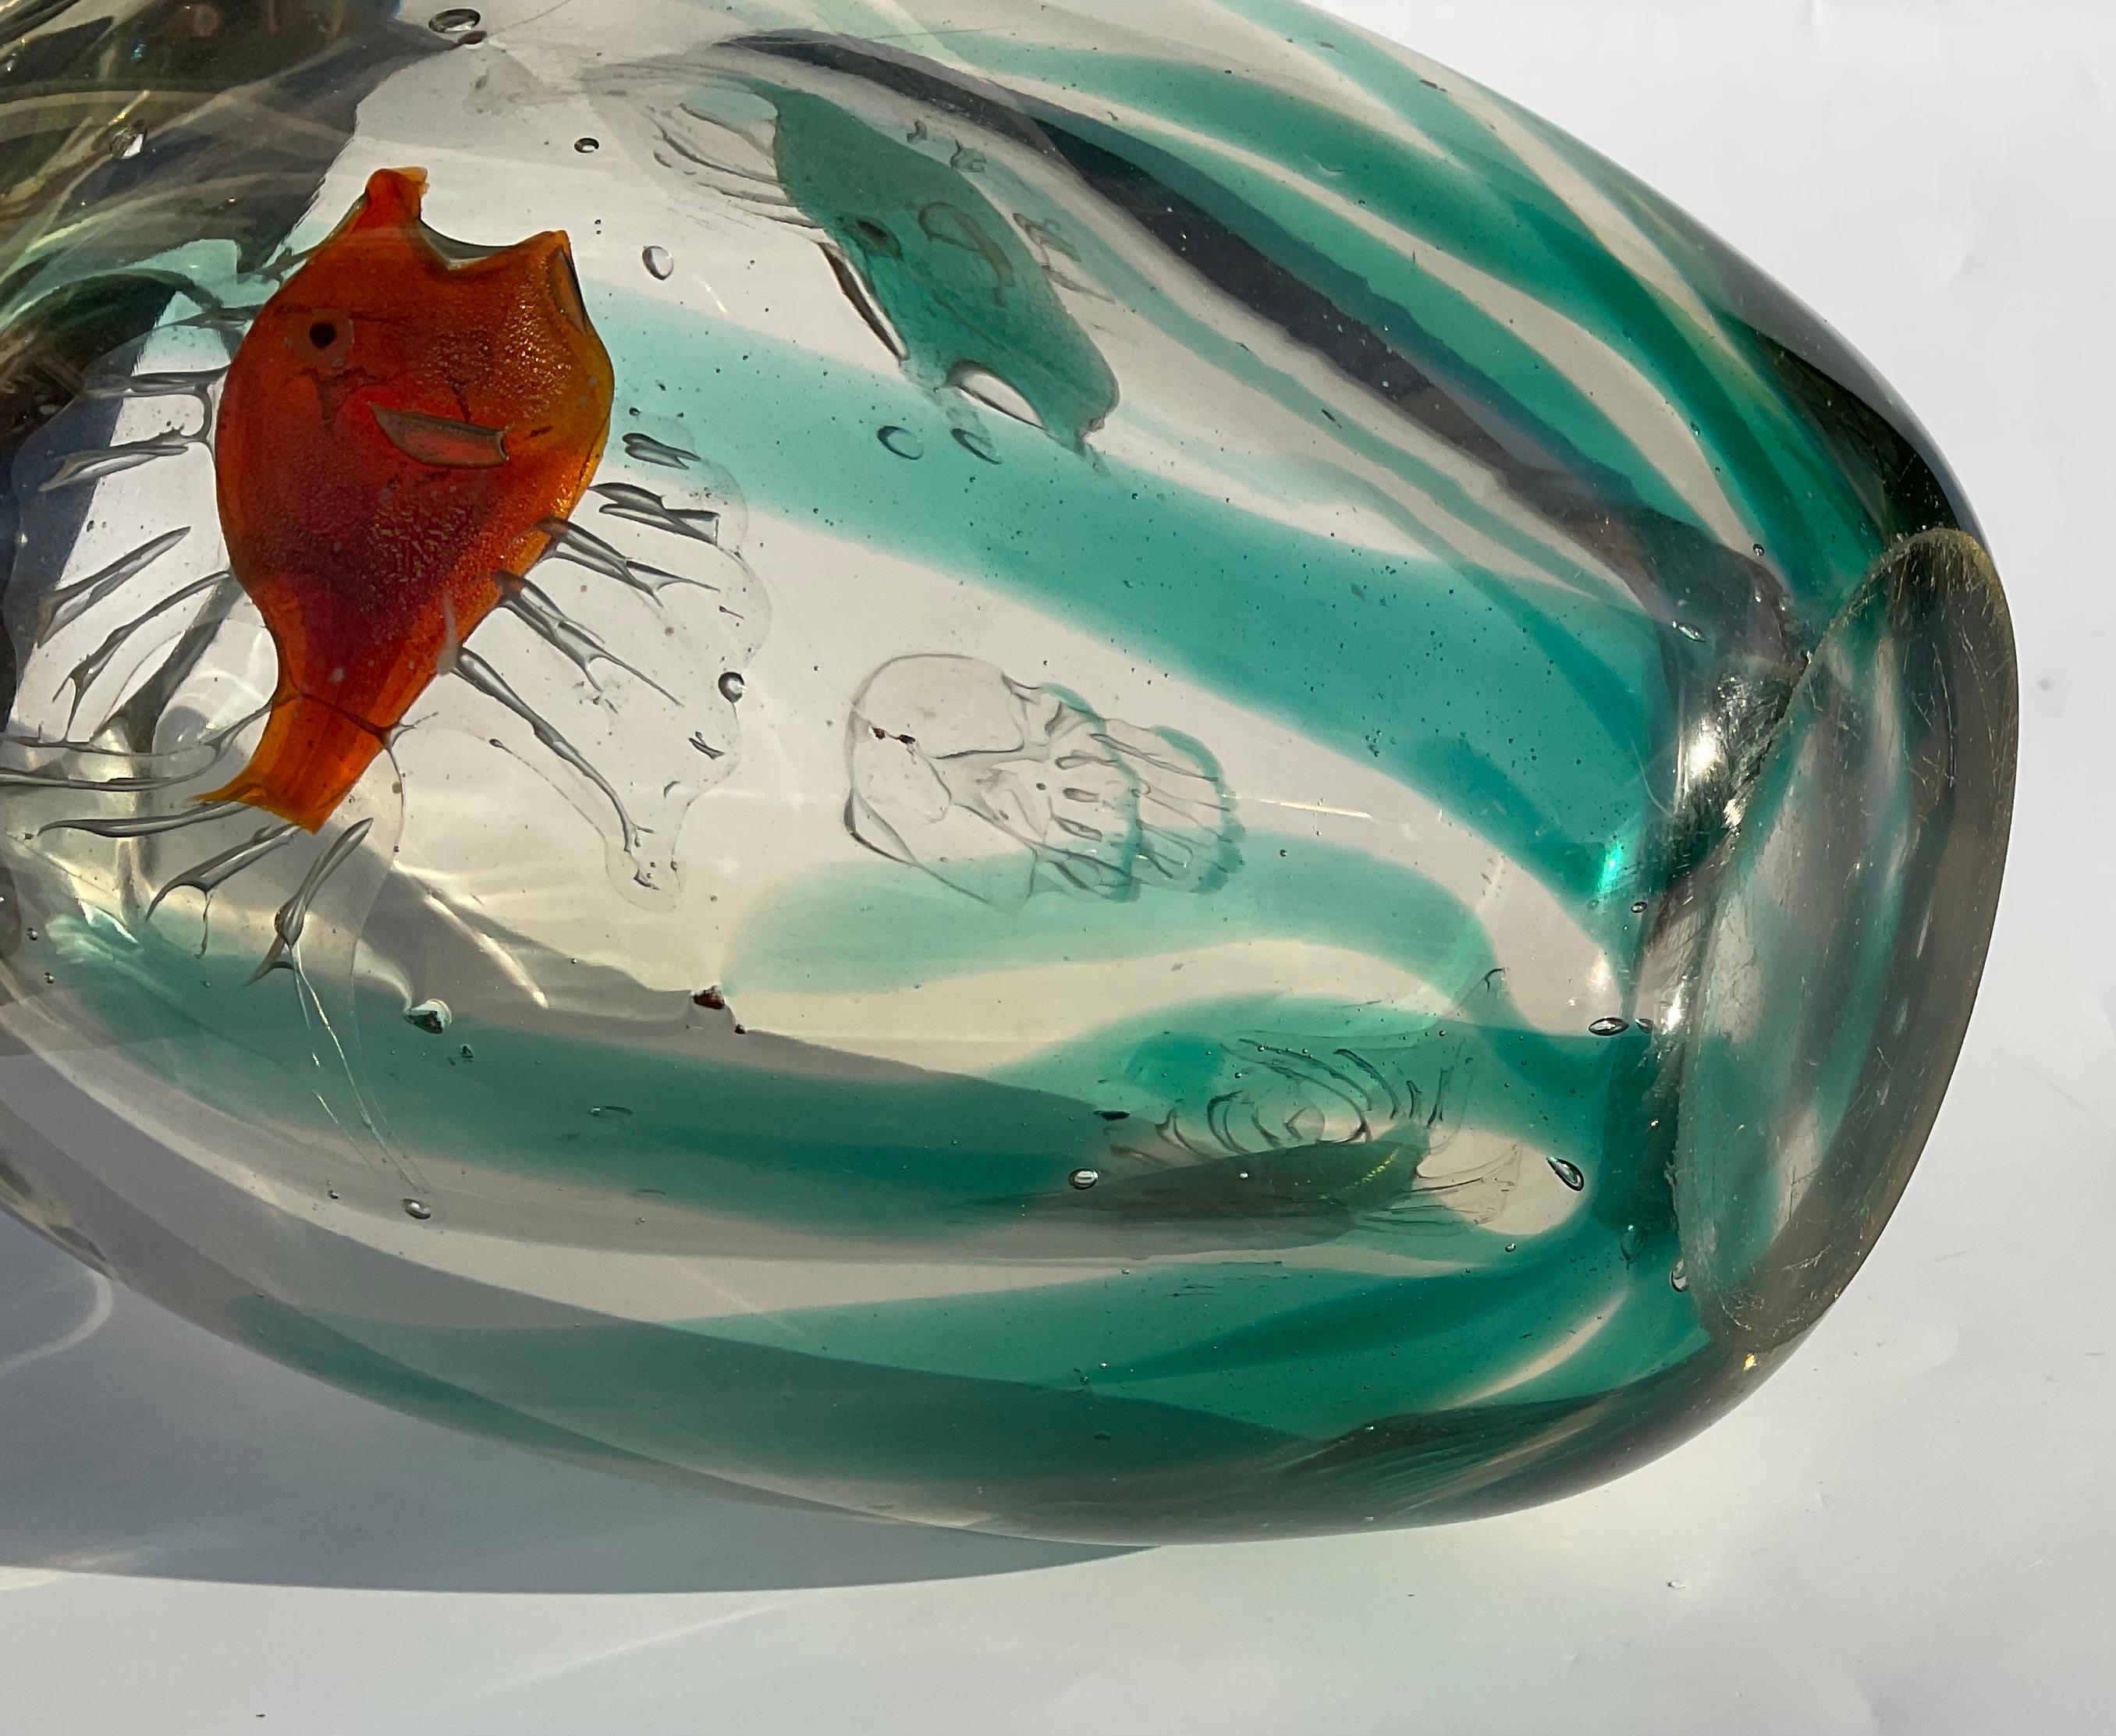 Offered for sale is a rare and important Alfredo Barbini (1912-2007) Italian Murano blown glass aquarium vase. This fine example of Barbini's work has wonderful detail to the fish, fabulous transparency and a great colors. This heavy and substantial